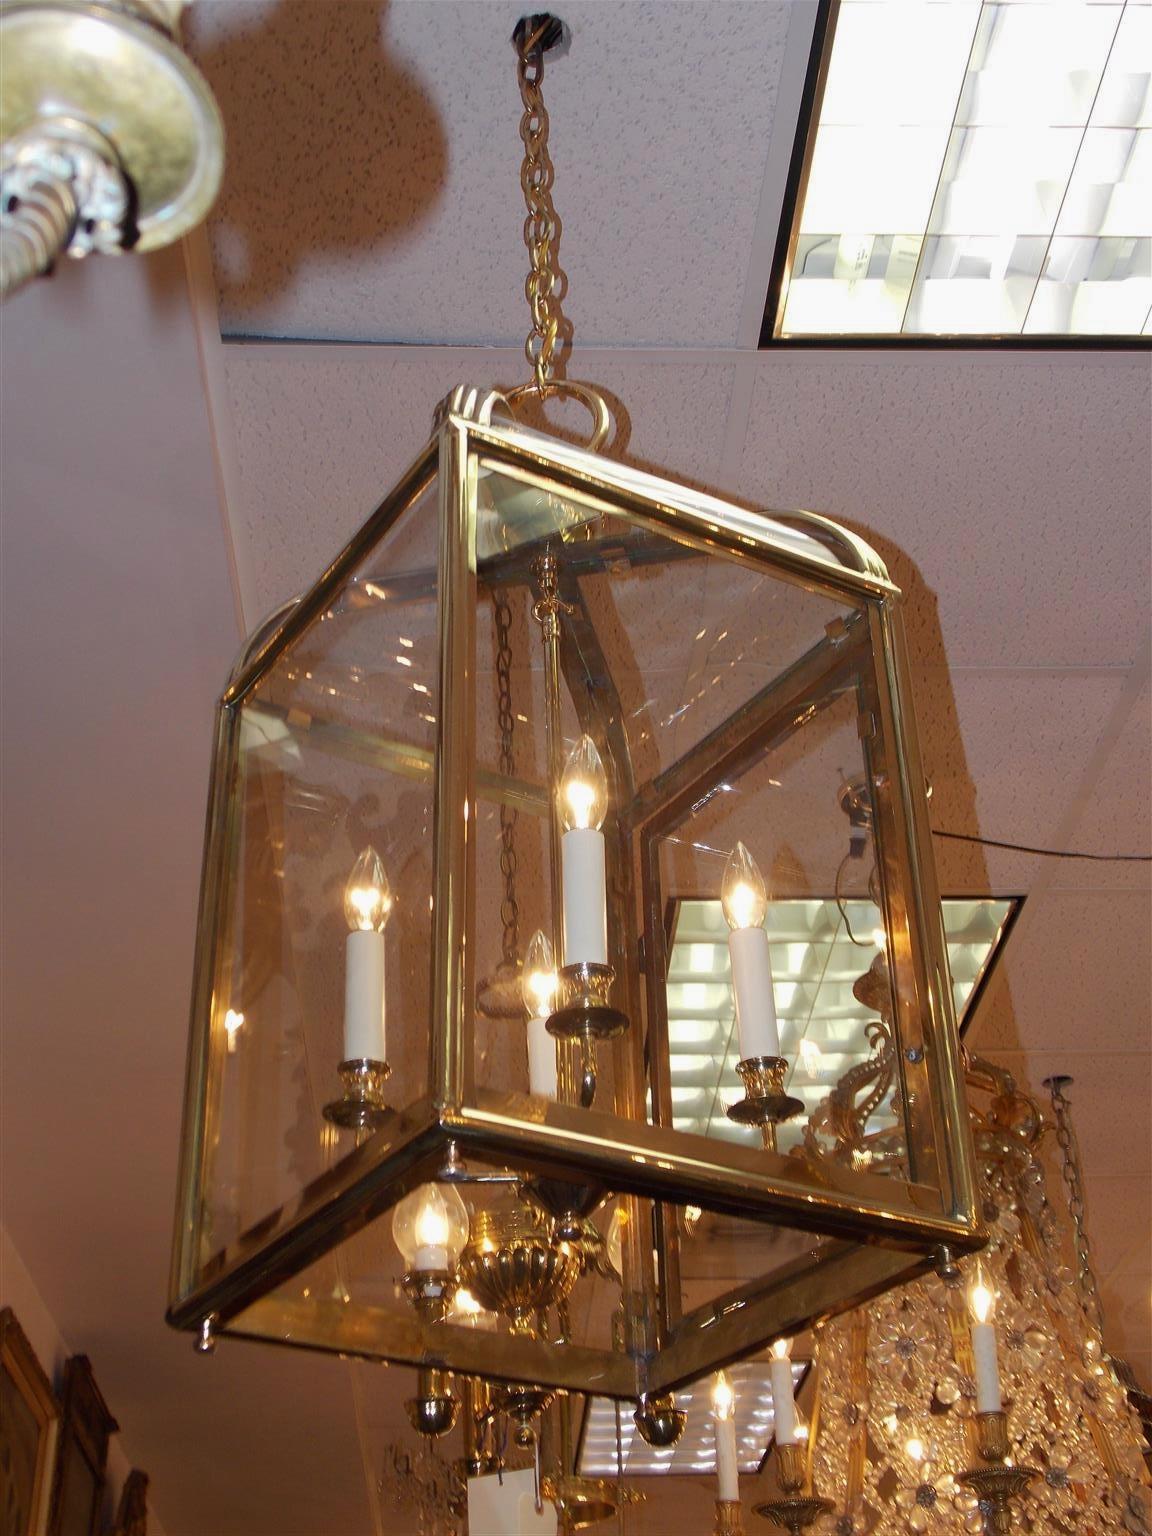 American brass glass dome hanging lantern with a centered circular sphere ring, fluted exterior border, hinged locking door revealing four-light interior cluster, and resting on four bun finials. Lantern was originally candle powered, Late 19th